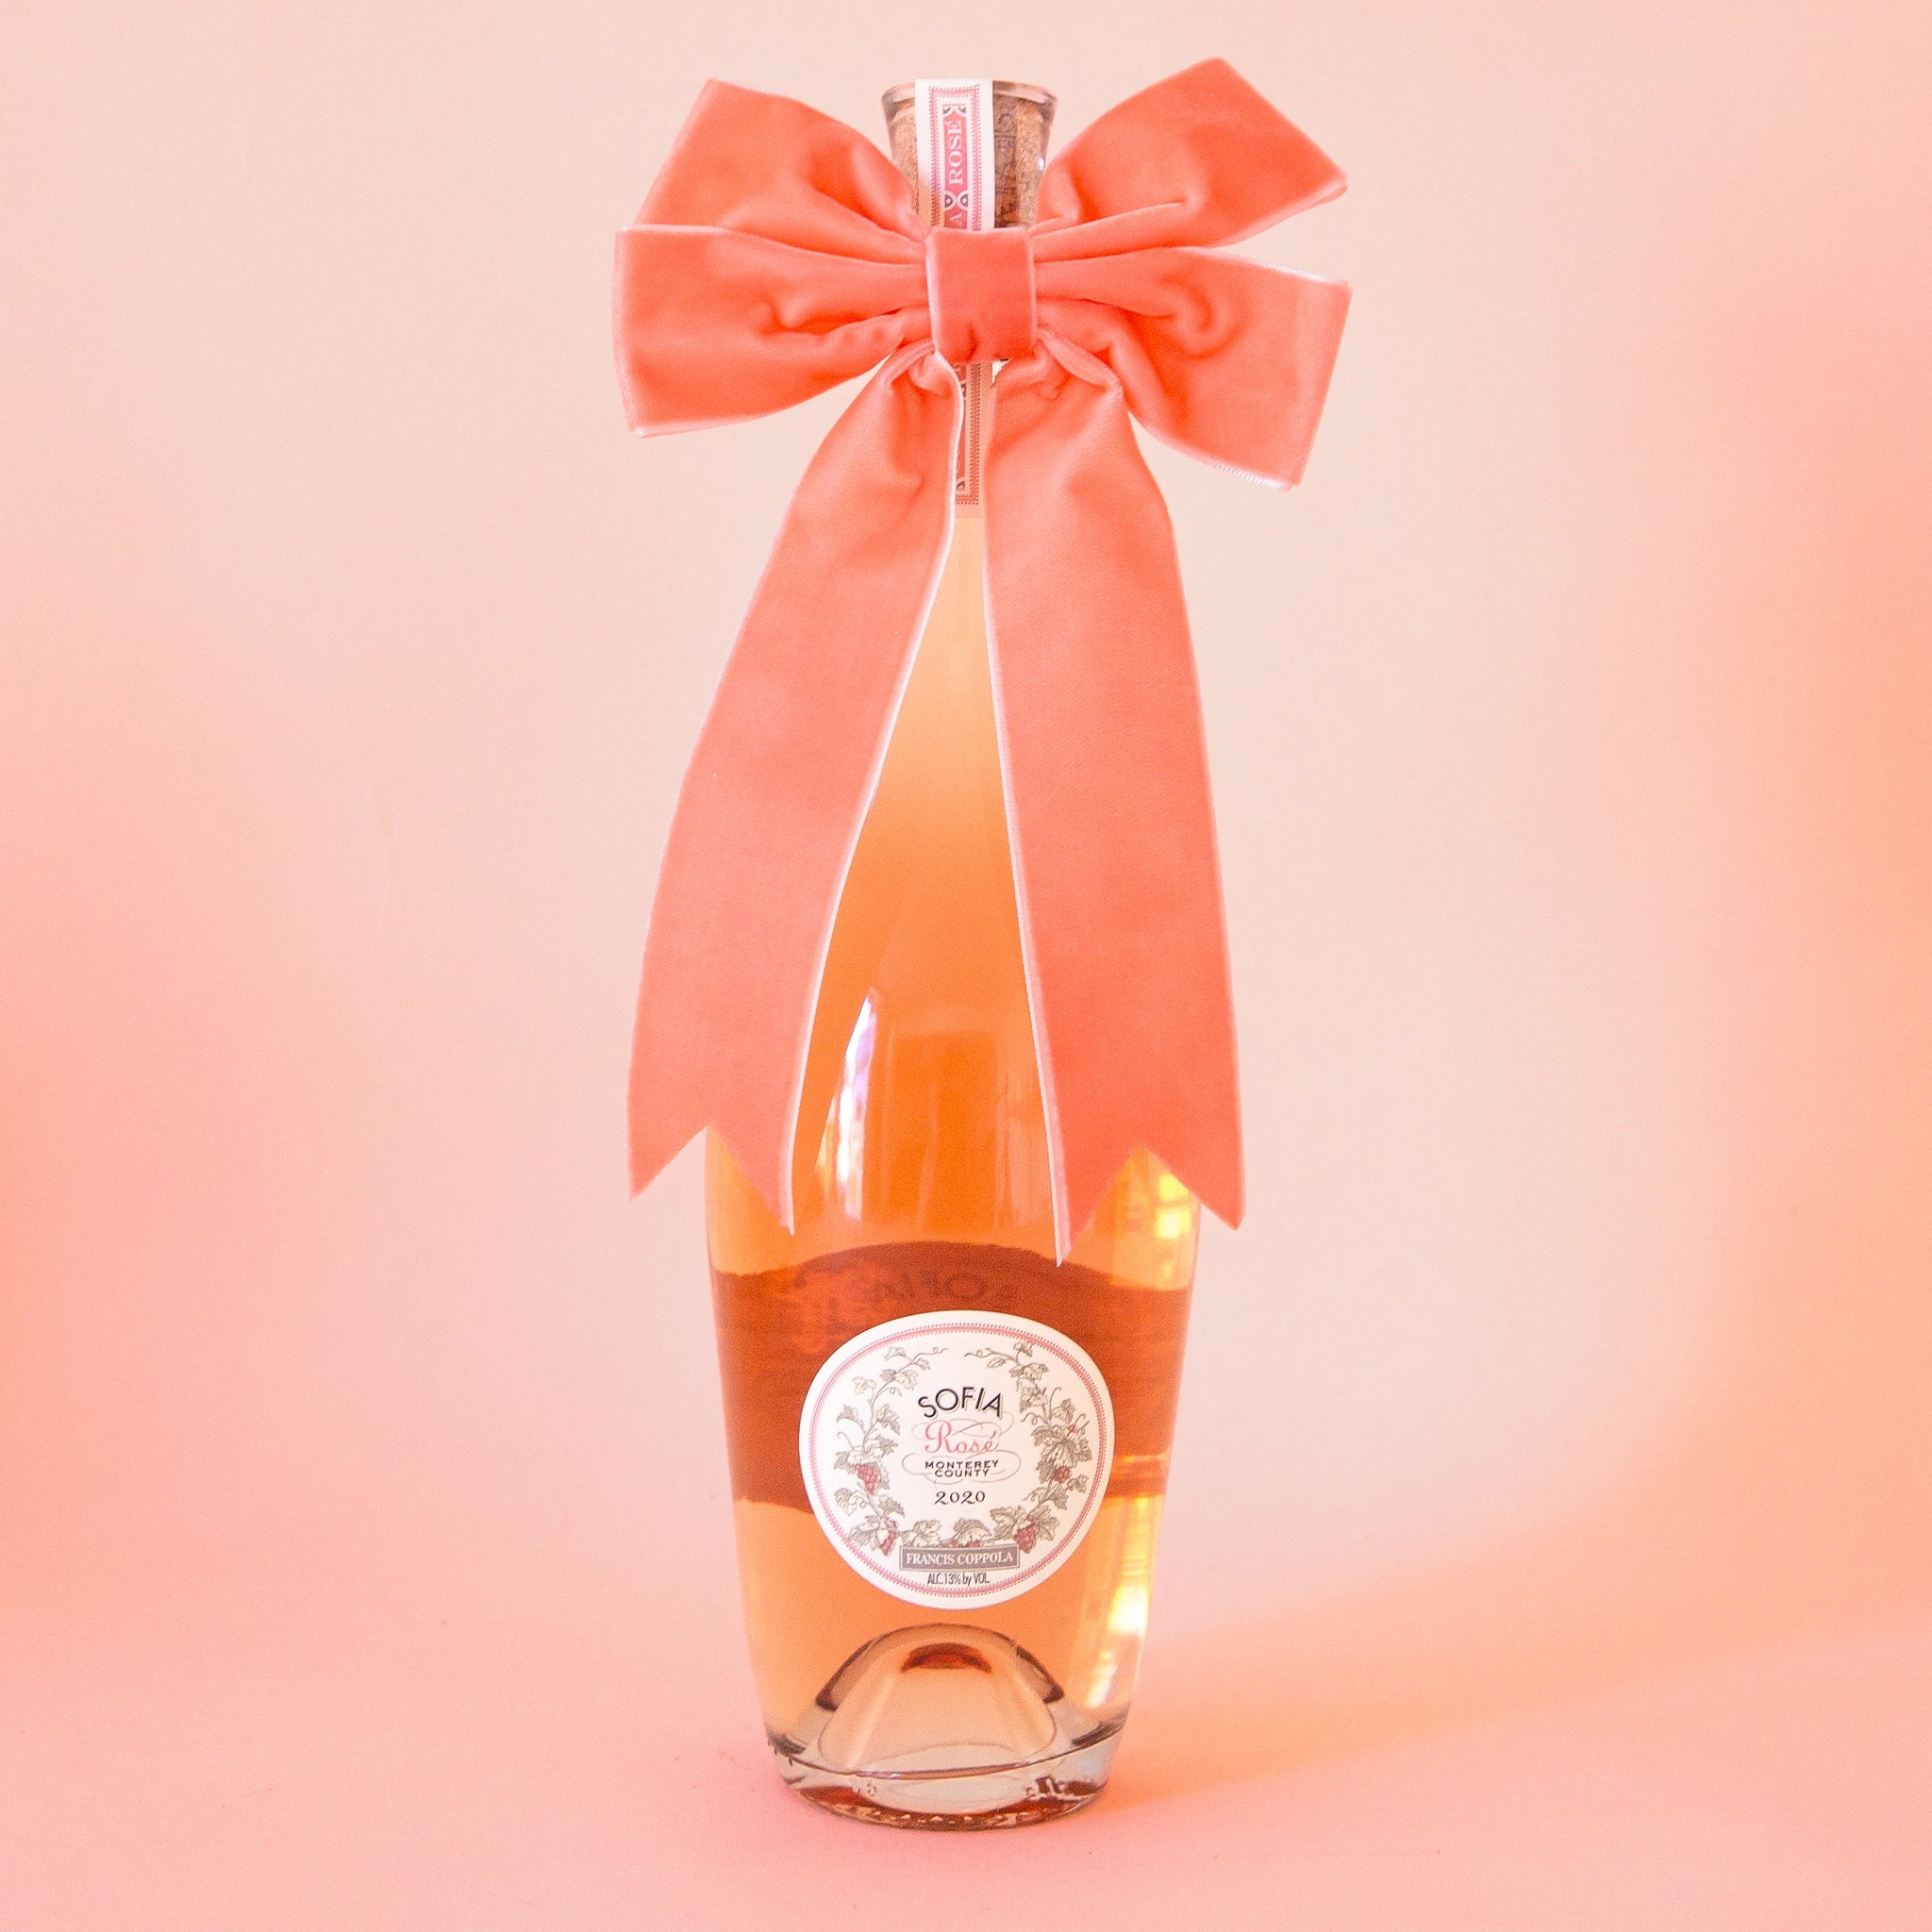 On a peachy background is a bottle of wine with a velvet peach colored bow on.